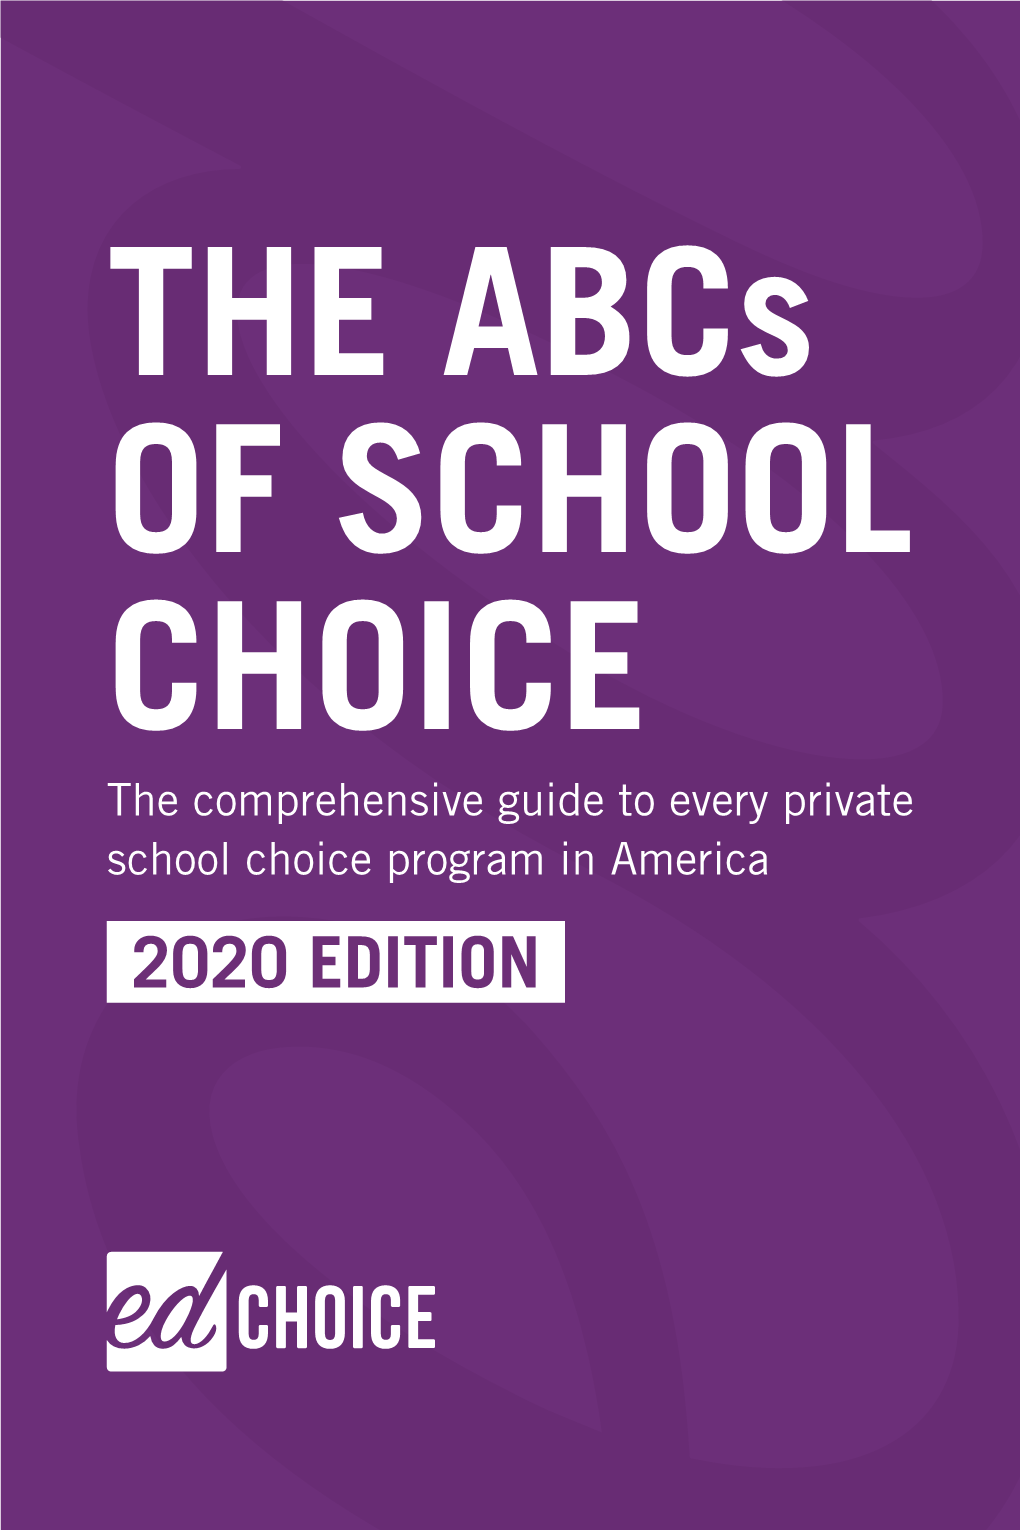 THE Abcs of SCHOOL CHOICE the Comprehensive Guide to Every Private School Choice Program in America 2020 EDITION the Abcs ABOUT EDCHOICE